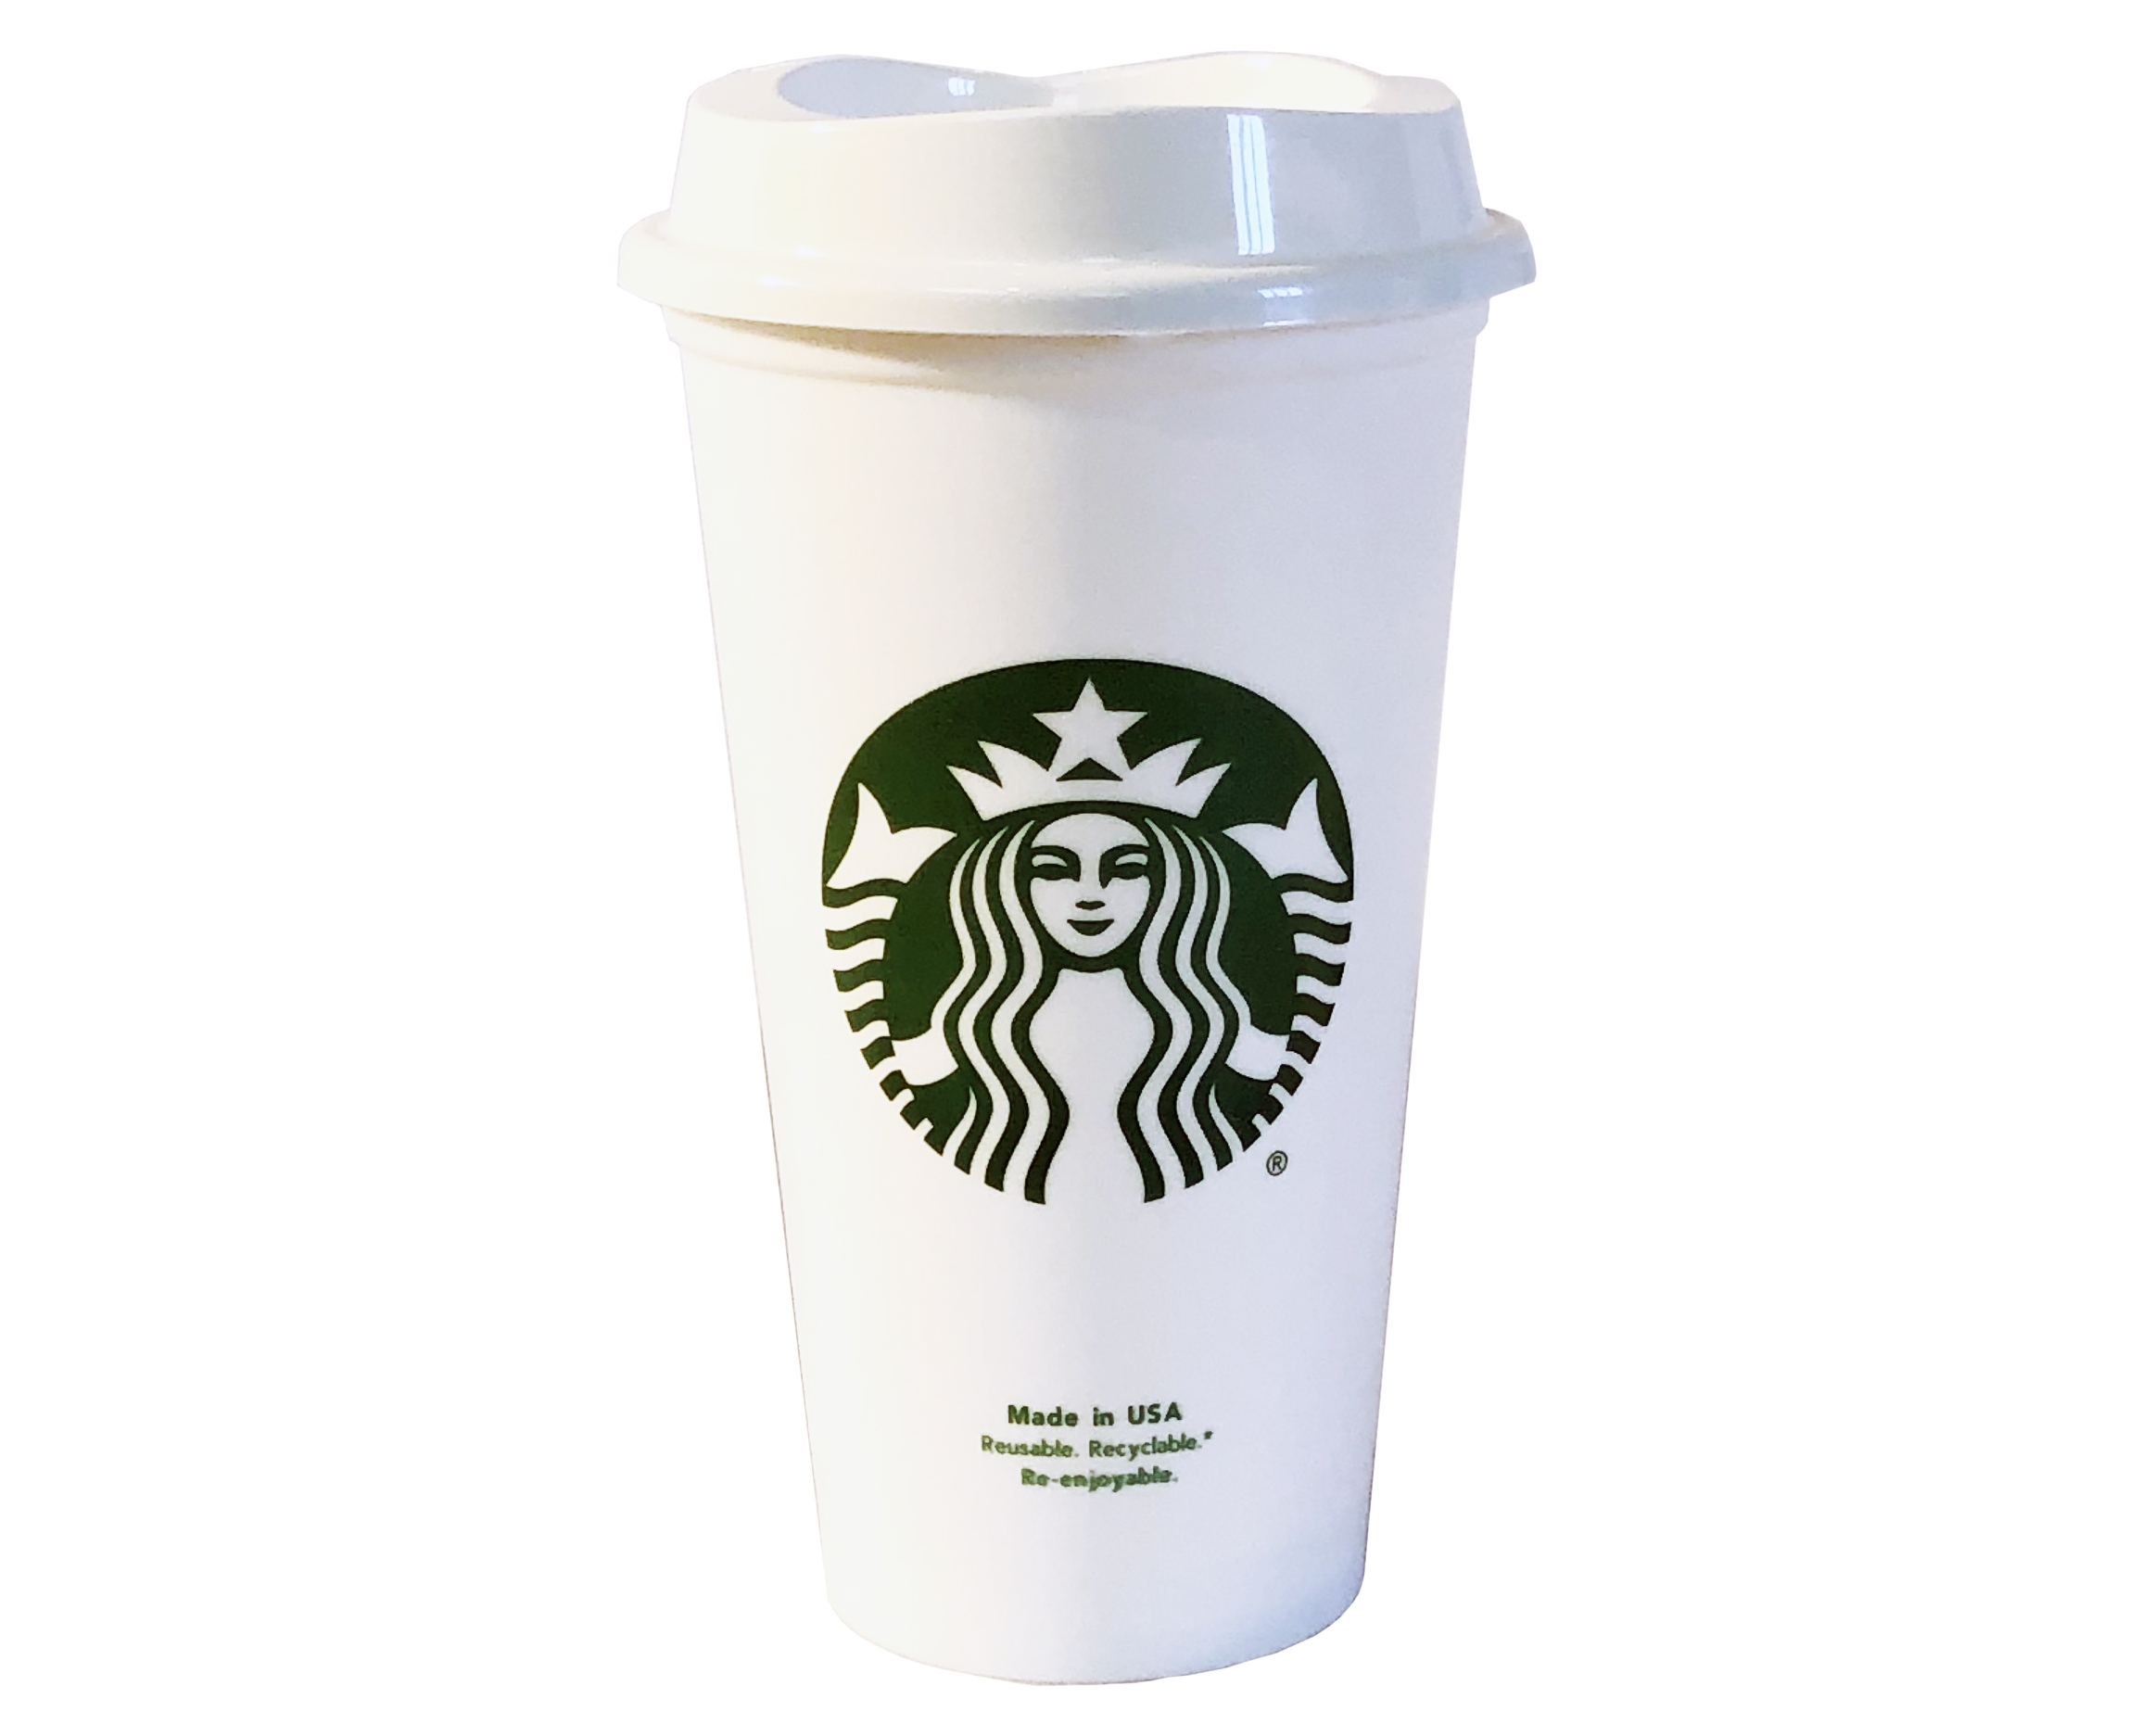 Starbucks Reusable Travel Hot Cup with Lid - 16oz